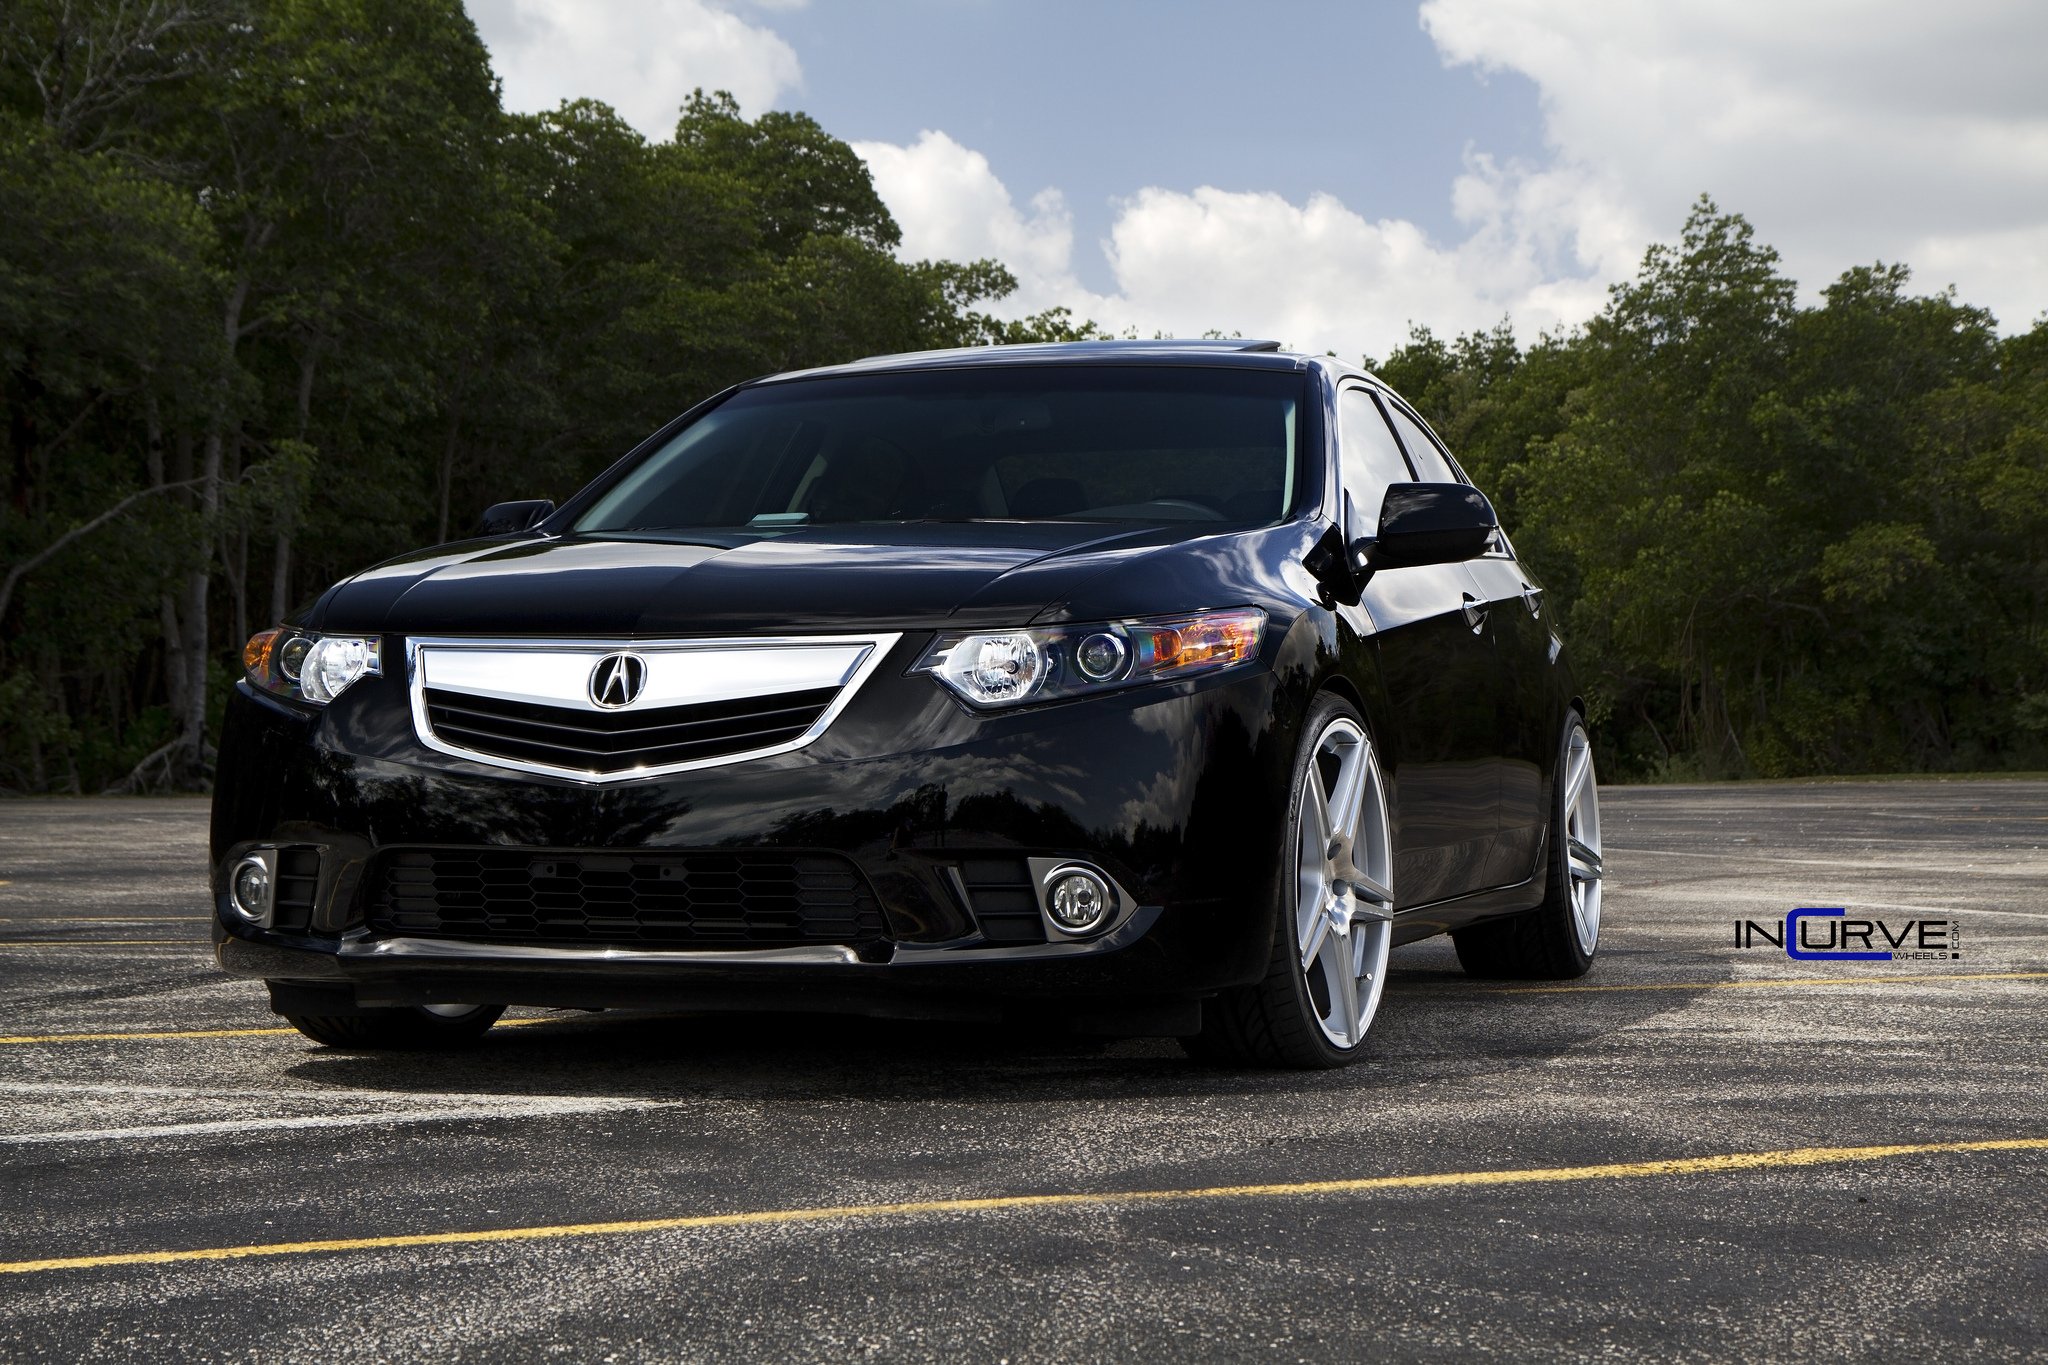 2015, Incurve, Wheels, Cars, Tuning, Acura, Tsx Wallpaper